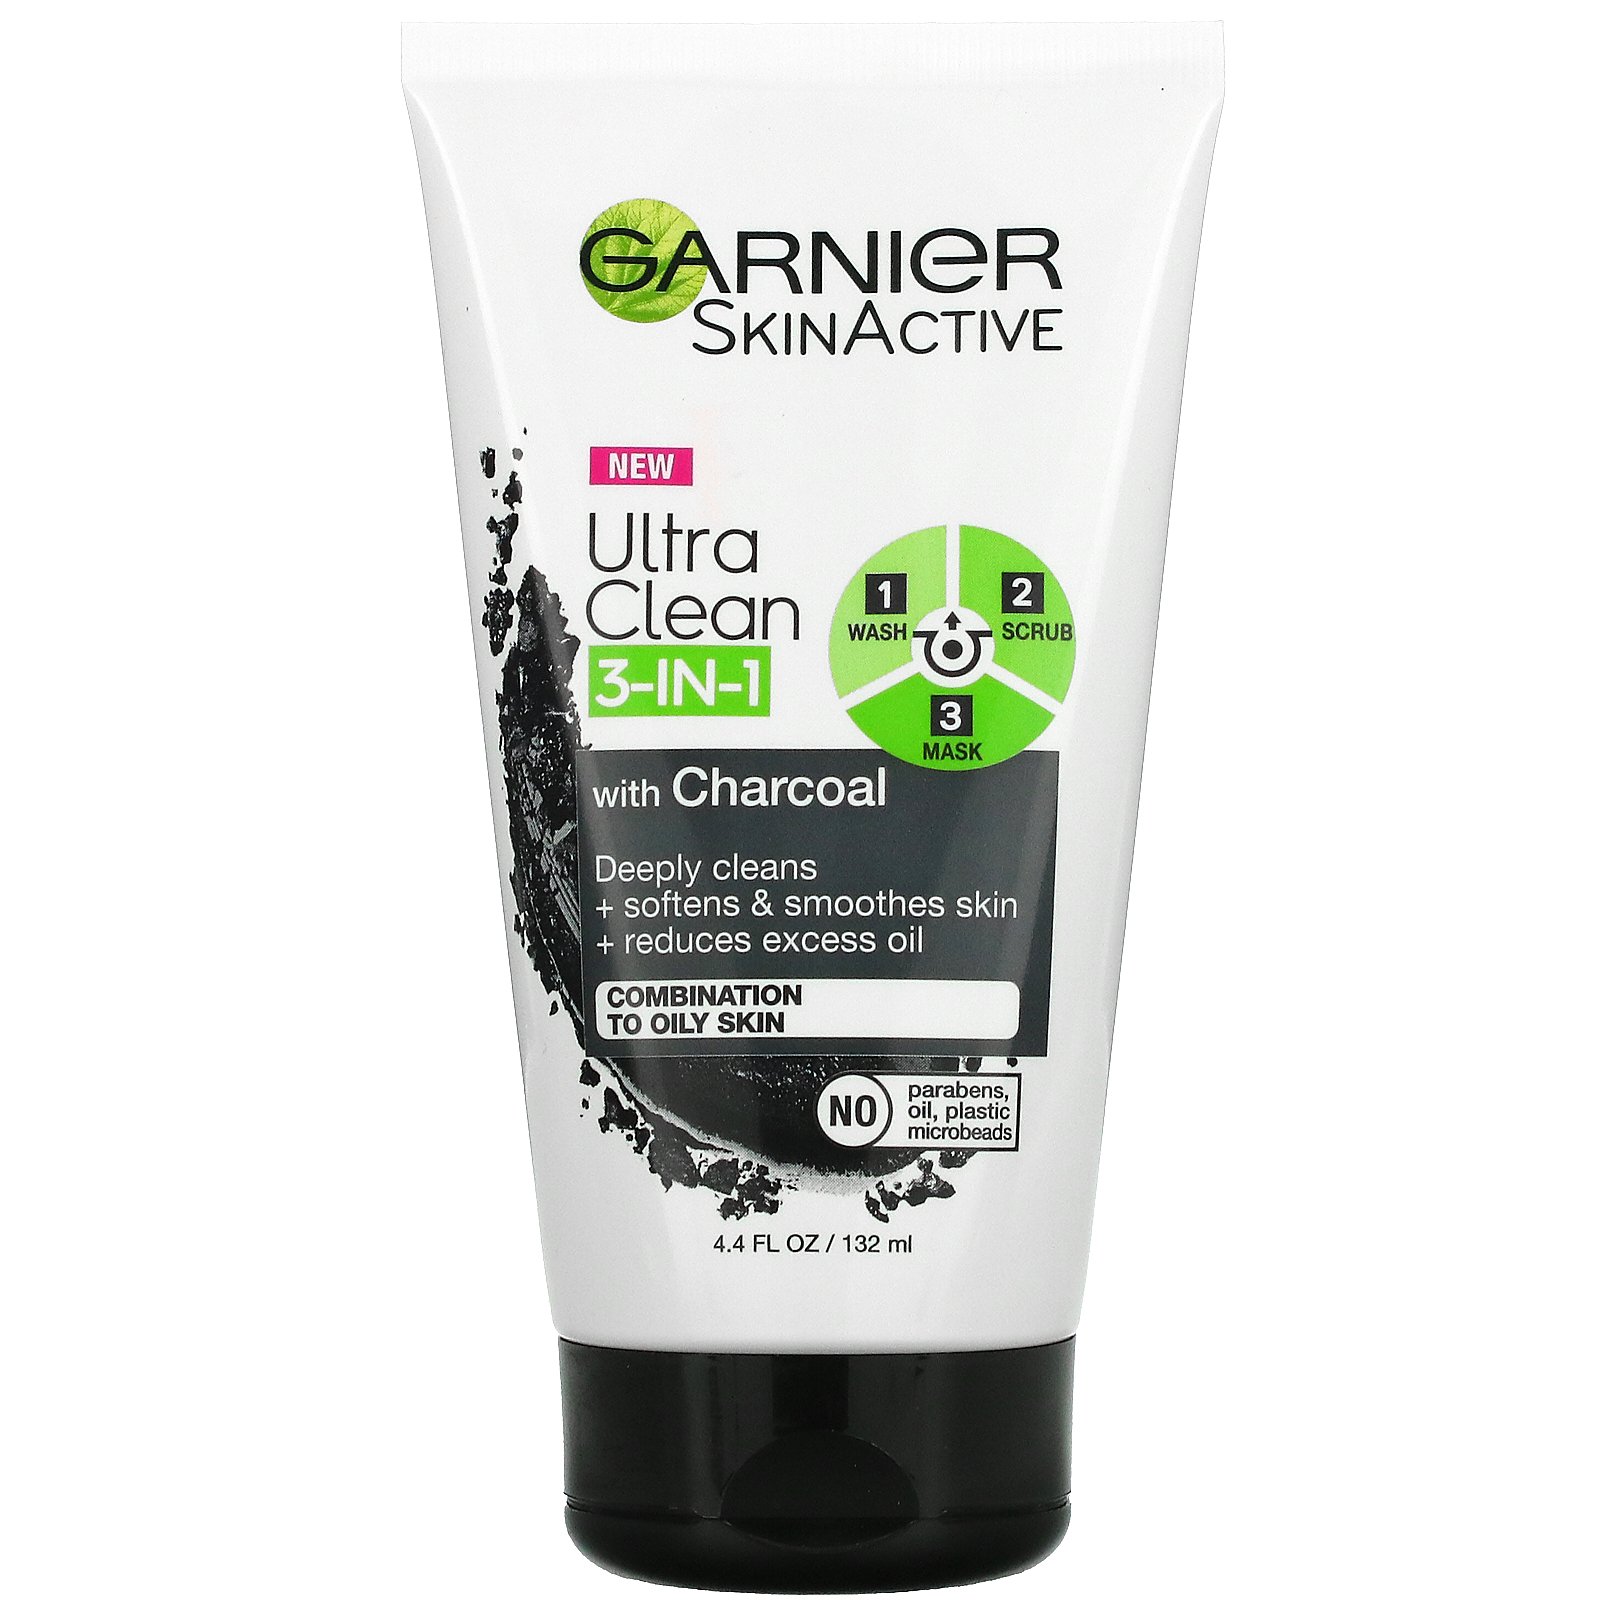 GARNIER Skinactive Ultra Clean 3-in-1 with Charcoal